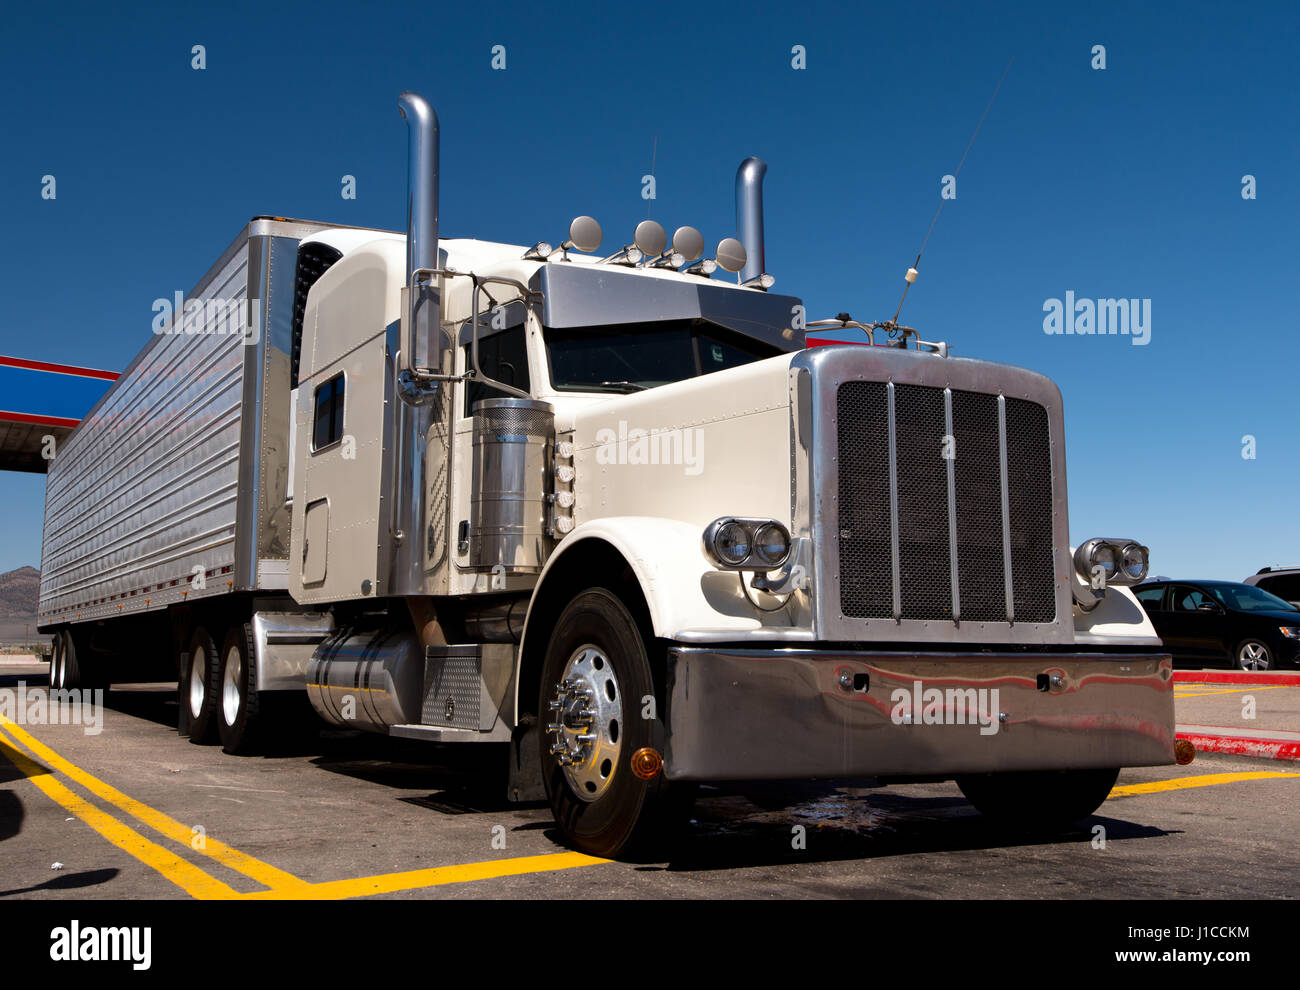 White color classic custom build and designed big rig semi truck with reefer trailer with chrome accents standing in the lined parking lot Stock Photo